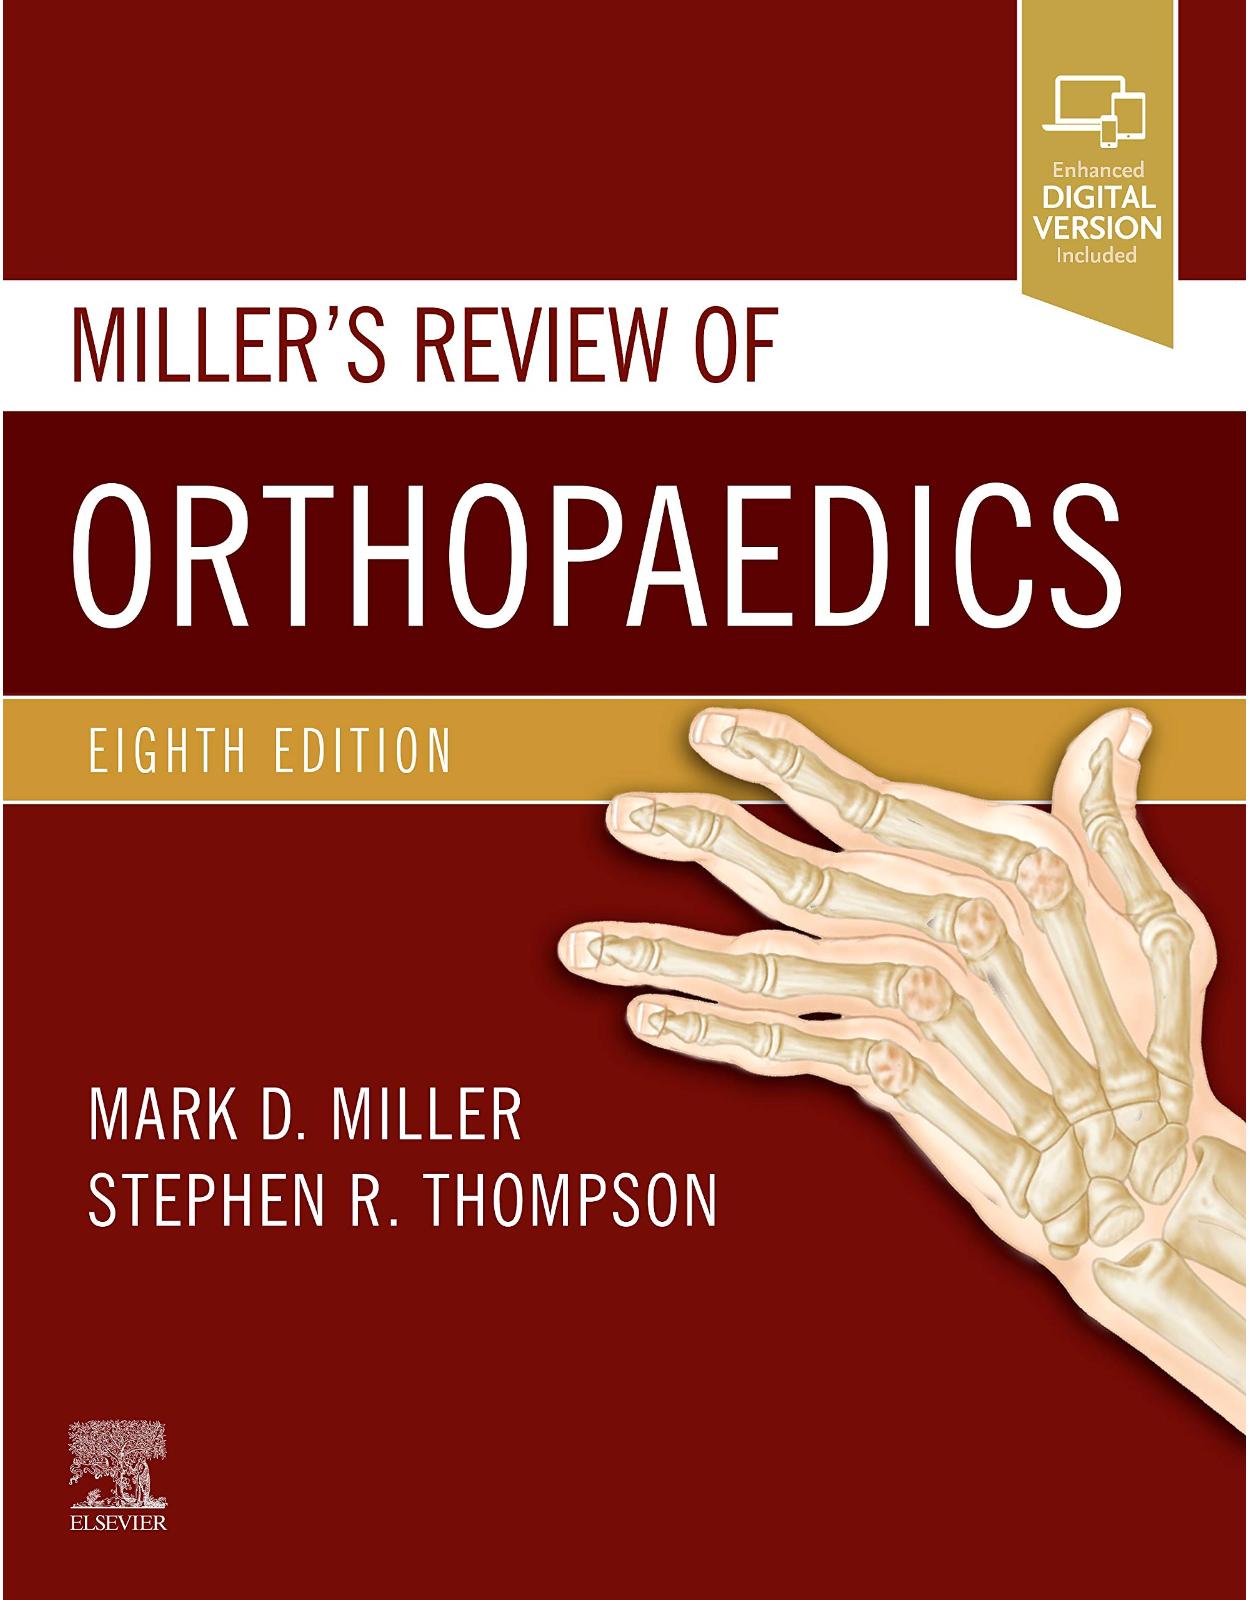 Miller’s Review of Orthopaedics